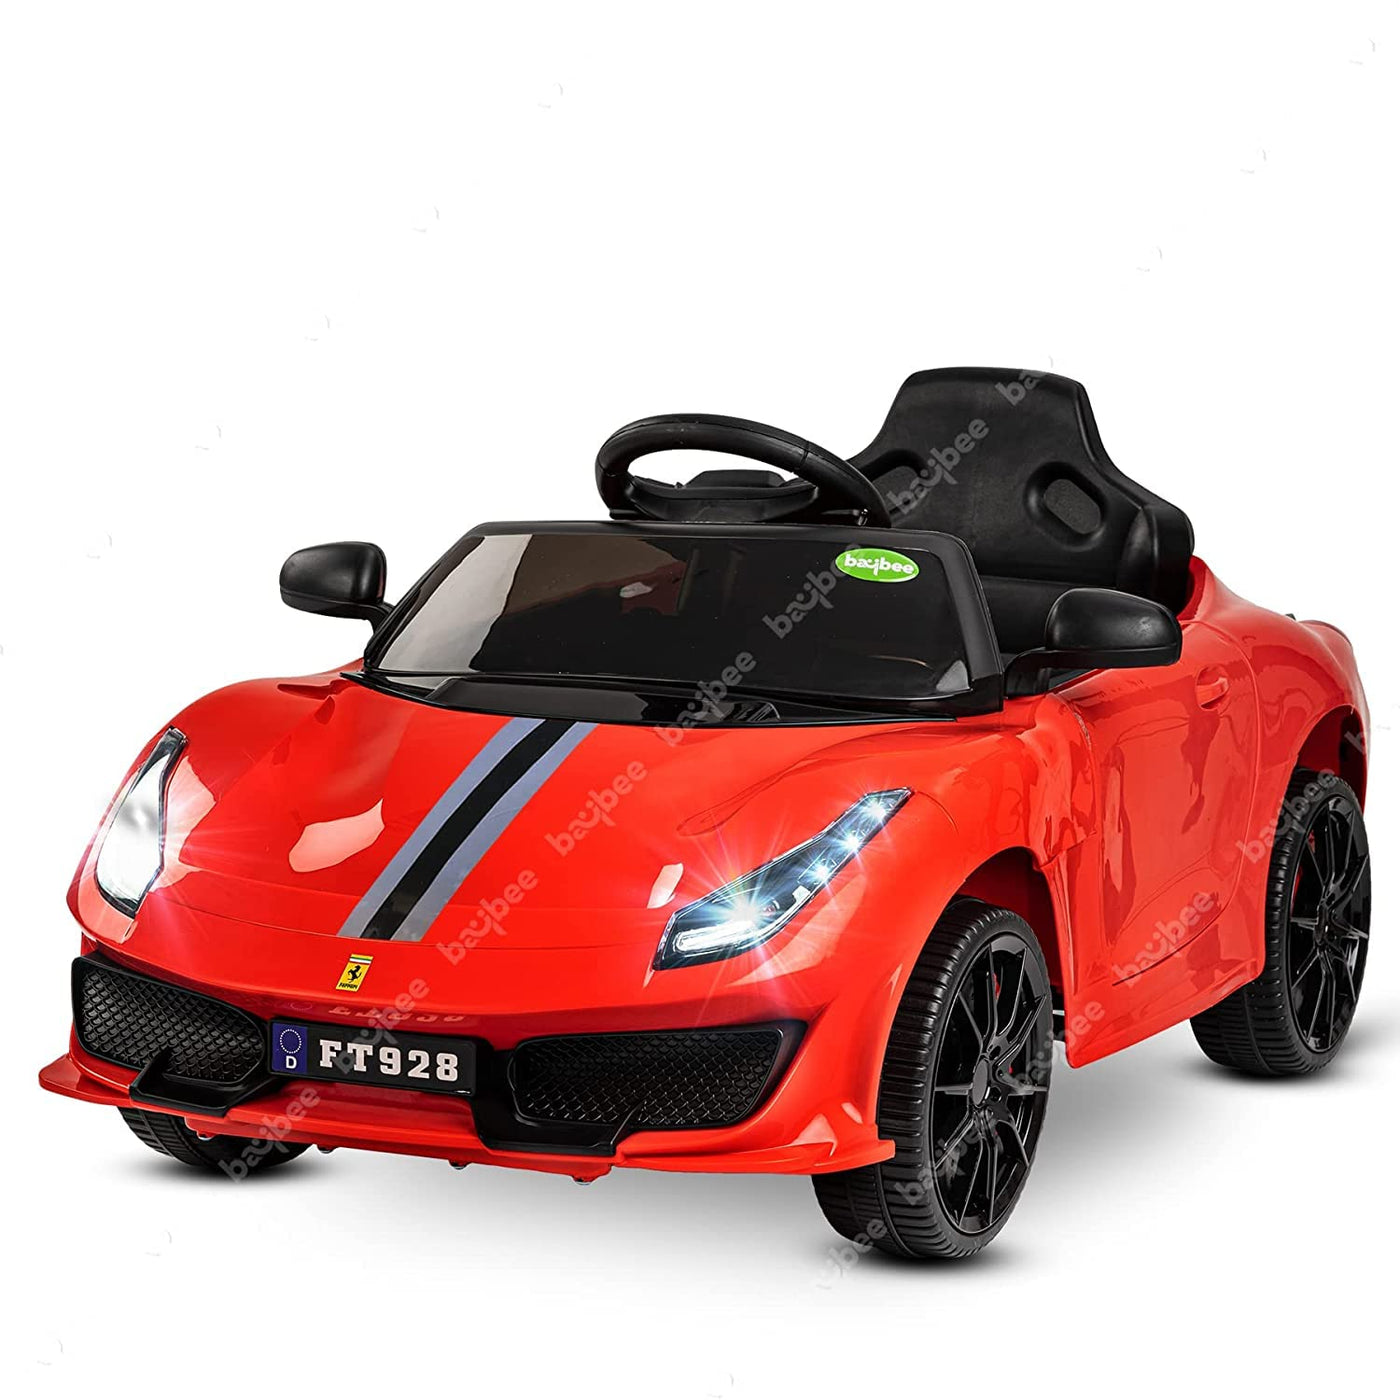 Mini Toy Car For Kids, Dual-use Battery Power Plastic Model